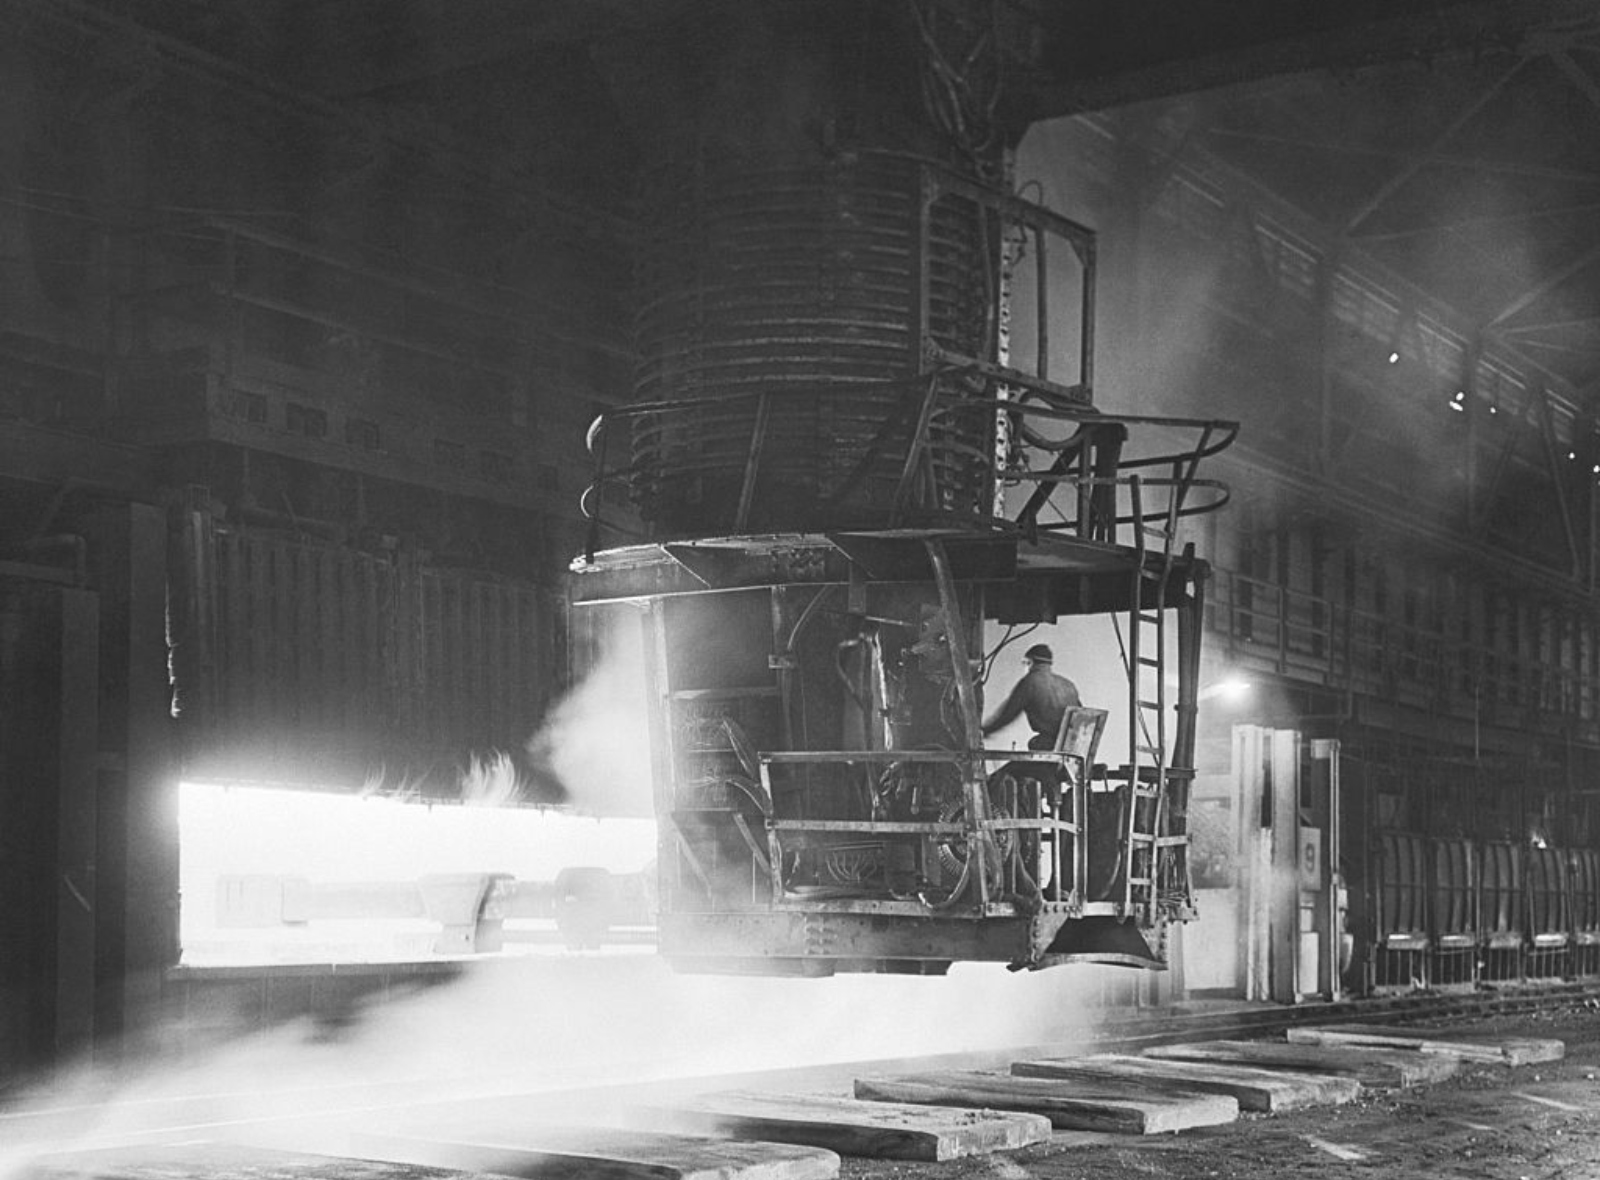 A man operates a furnace at U.S. Steel's Gary Works plant in January, 1945